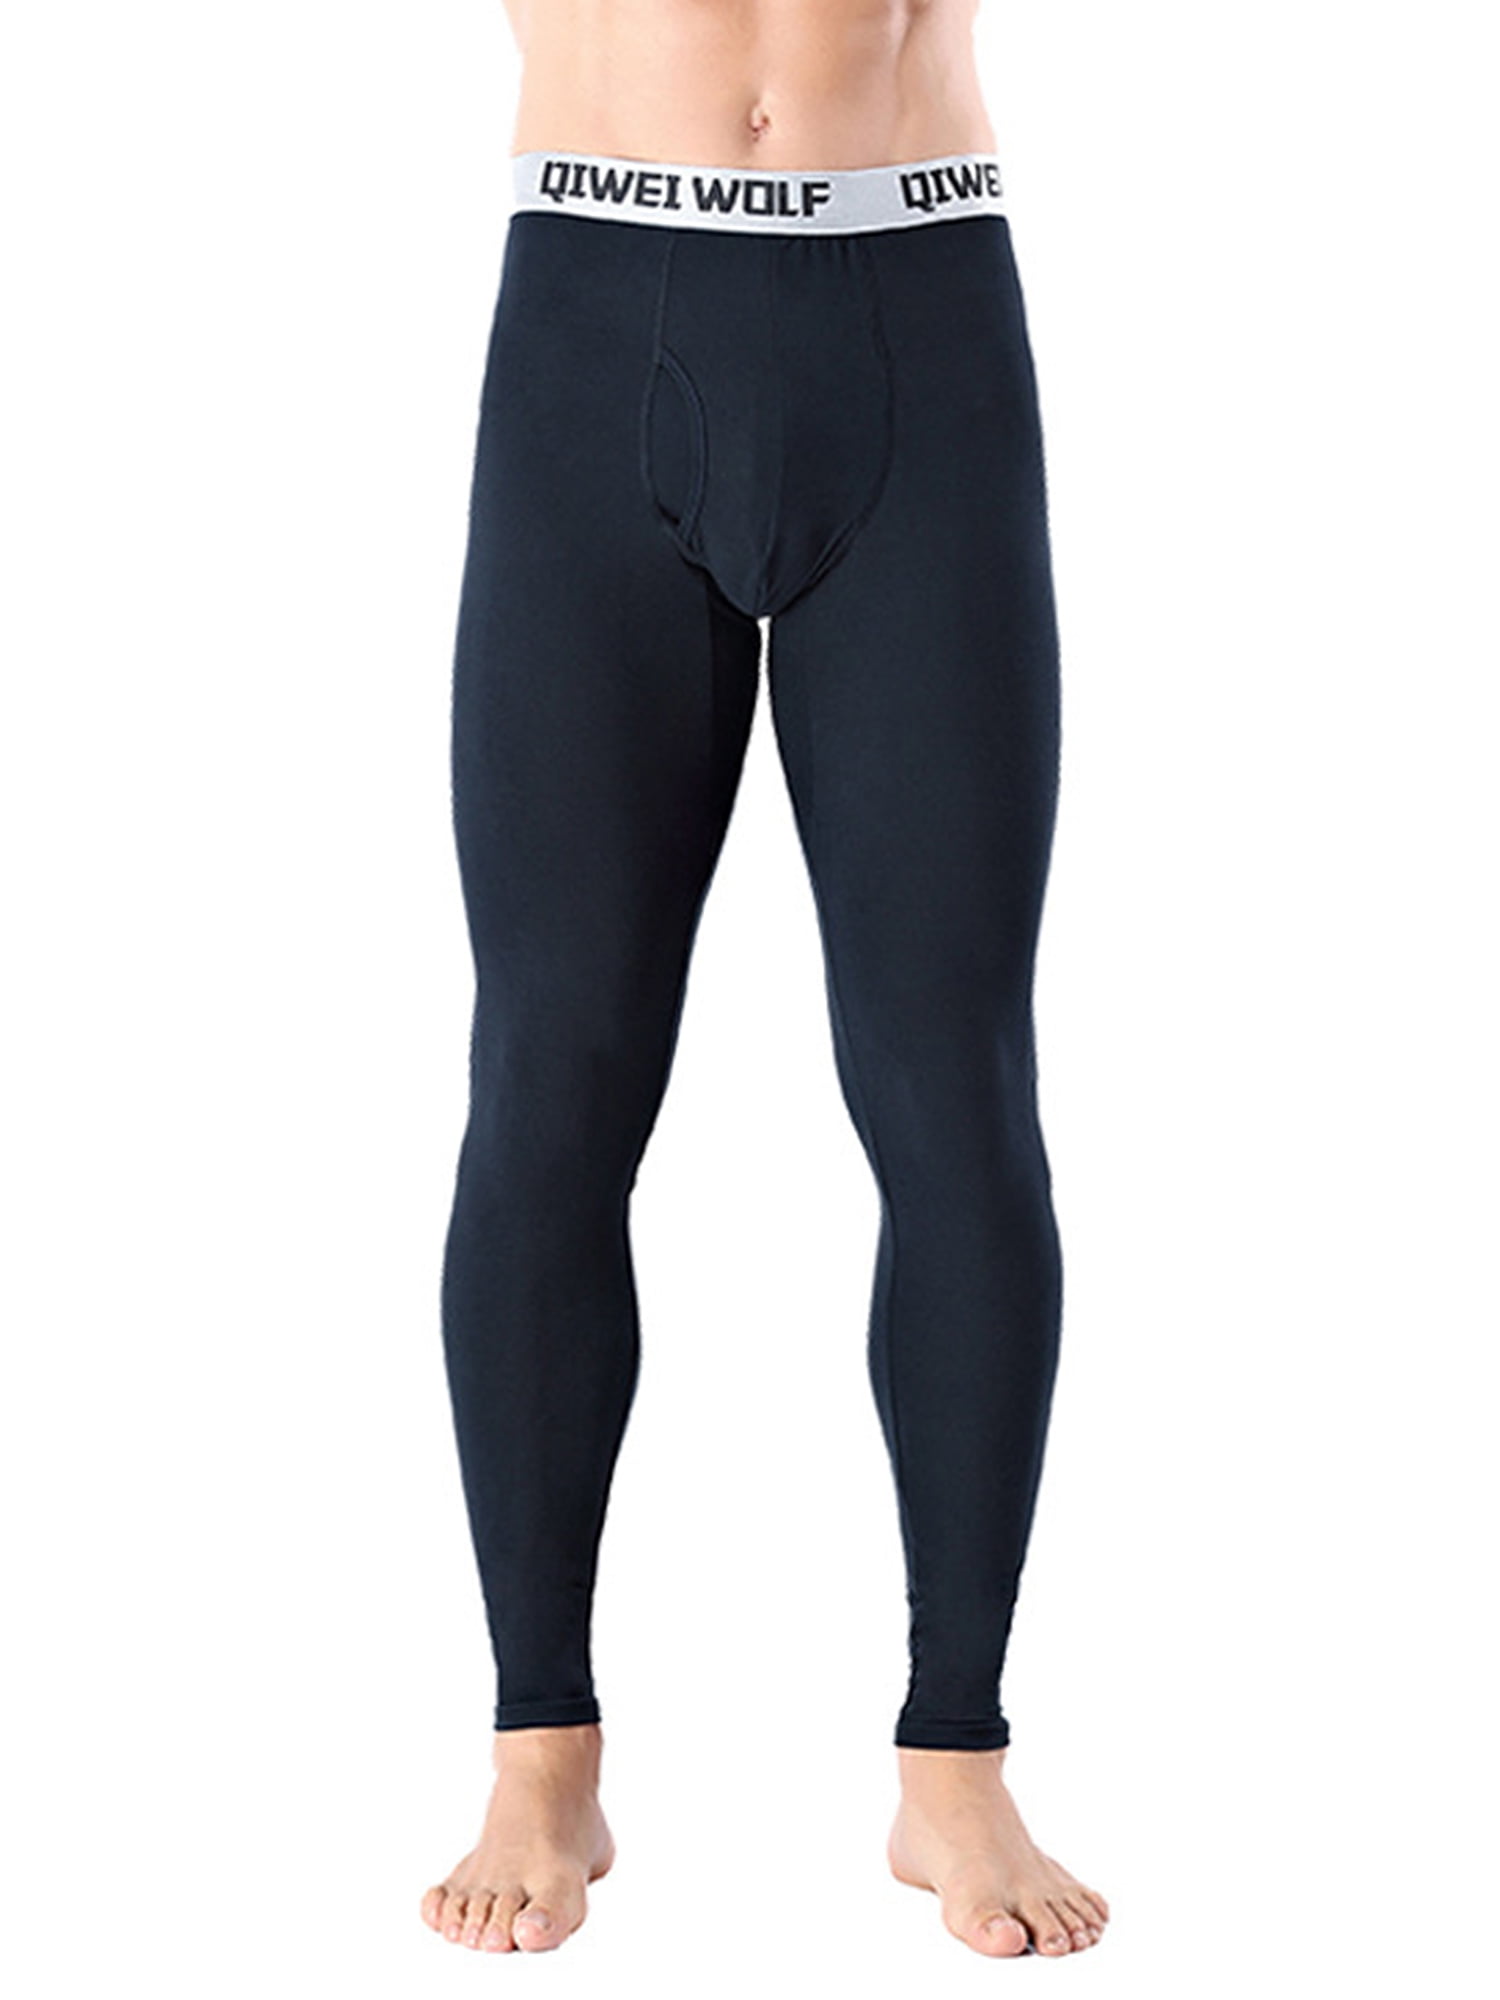 Men's Sportswear Gym Compression Long Pants Running Thermal Base Layer Trousers 